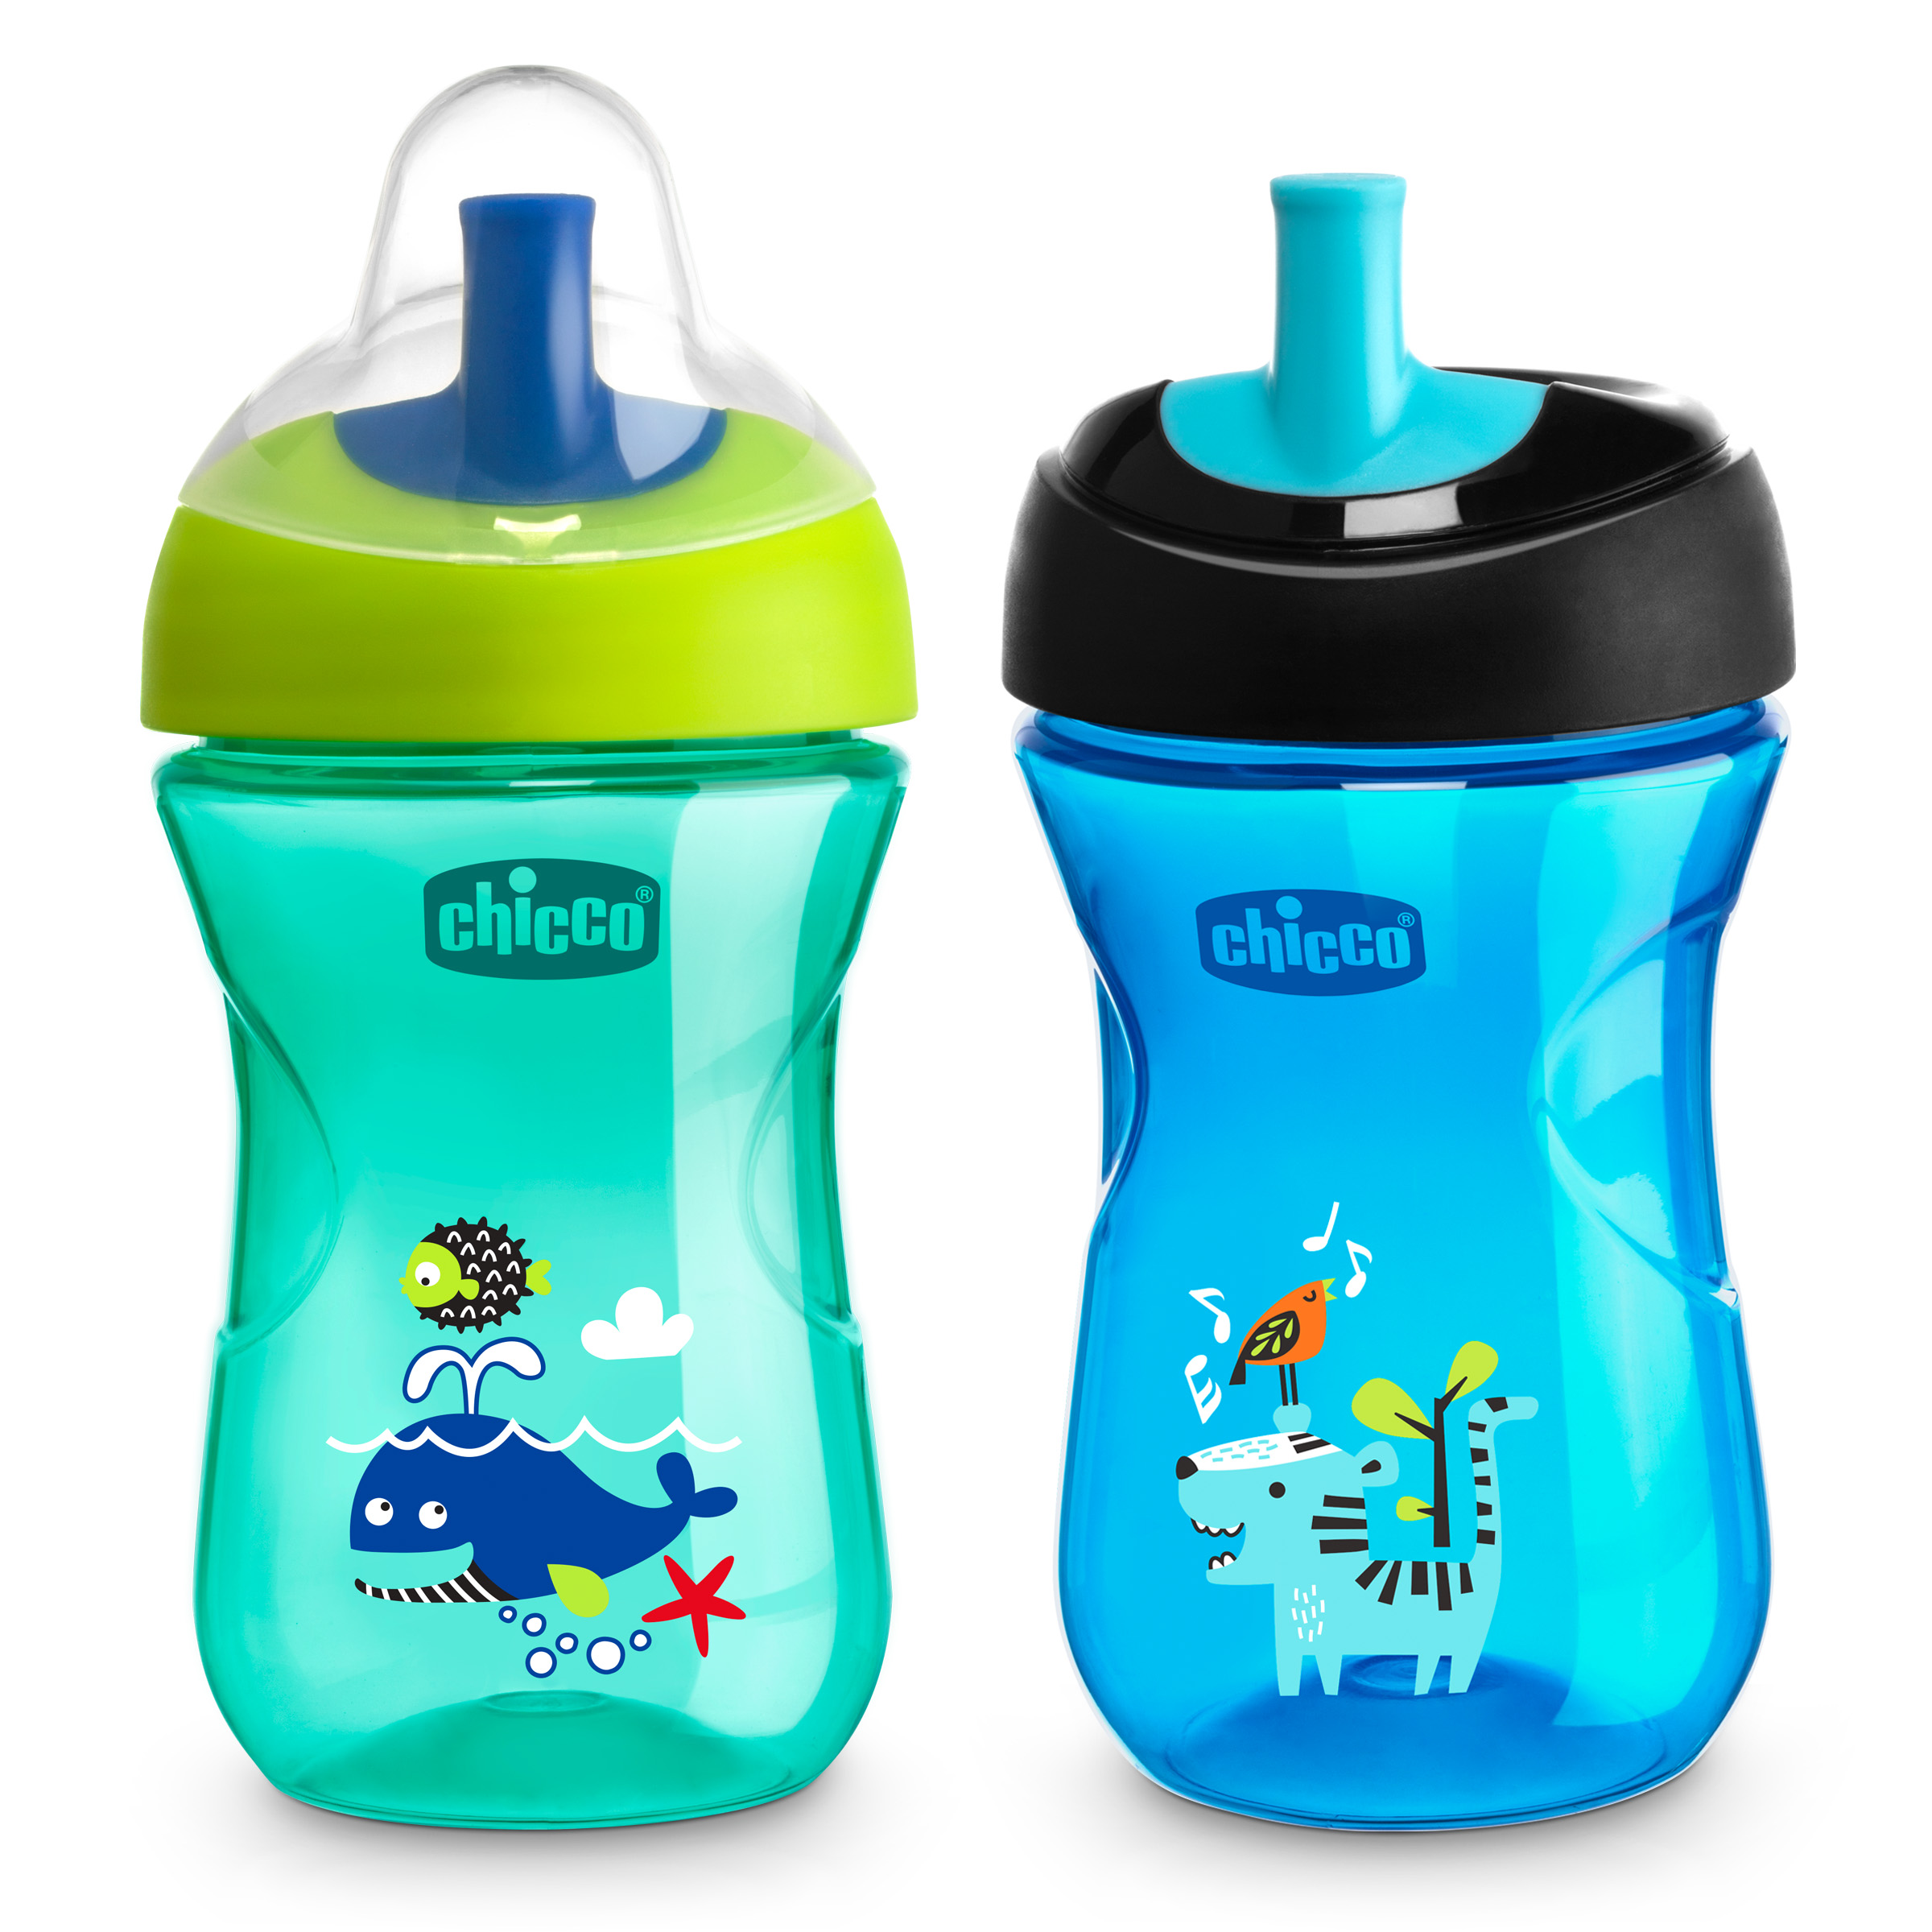 Chicco Sport Spout Trainer Sippy Cup Teal/Blue 9m+ 9oz (2pk) - image 1 of 9